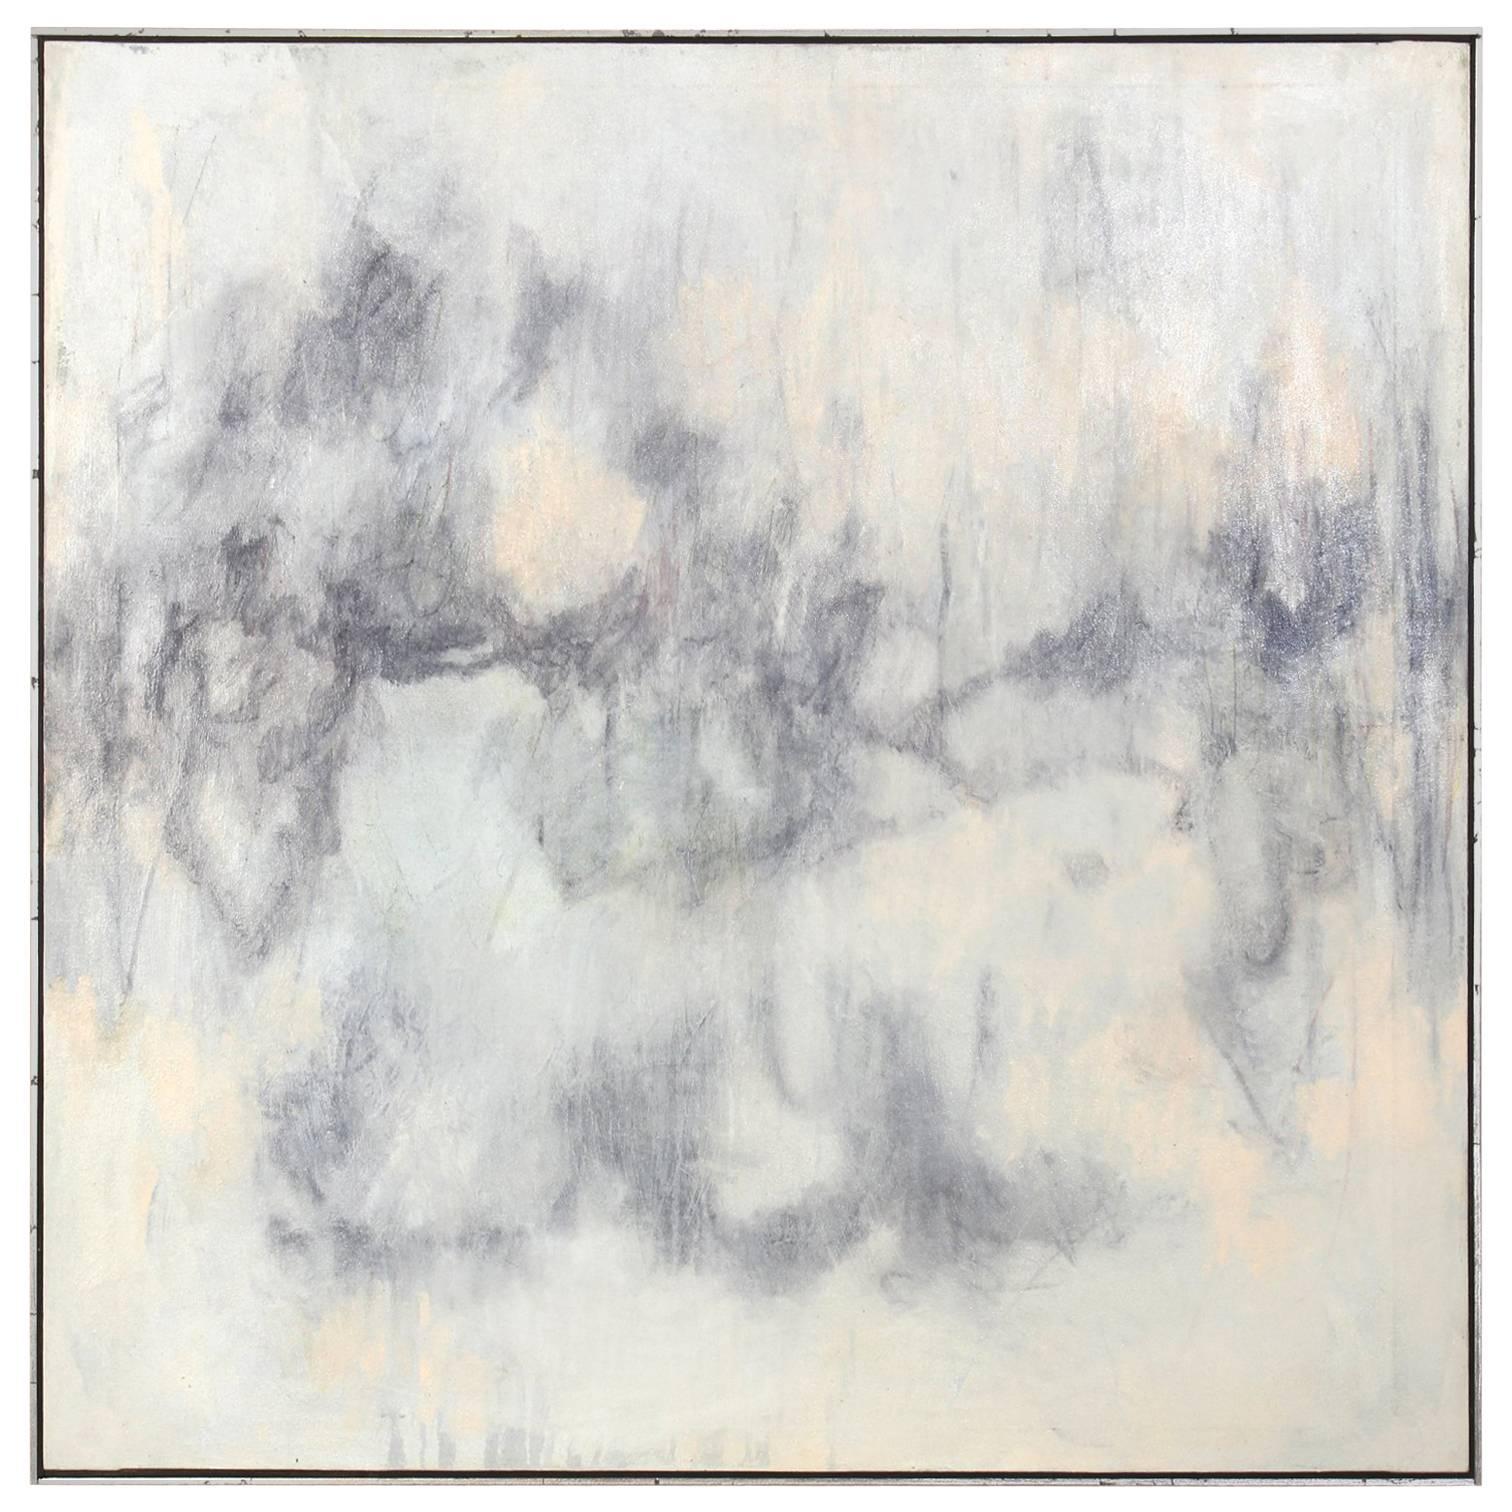 Large Abstract Painting in Blues and Grays